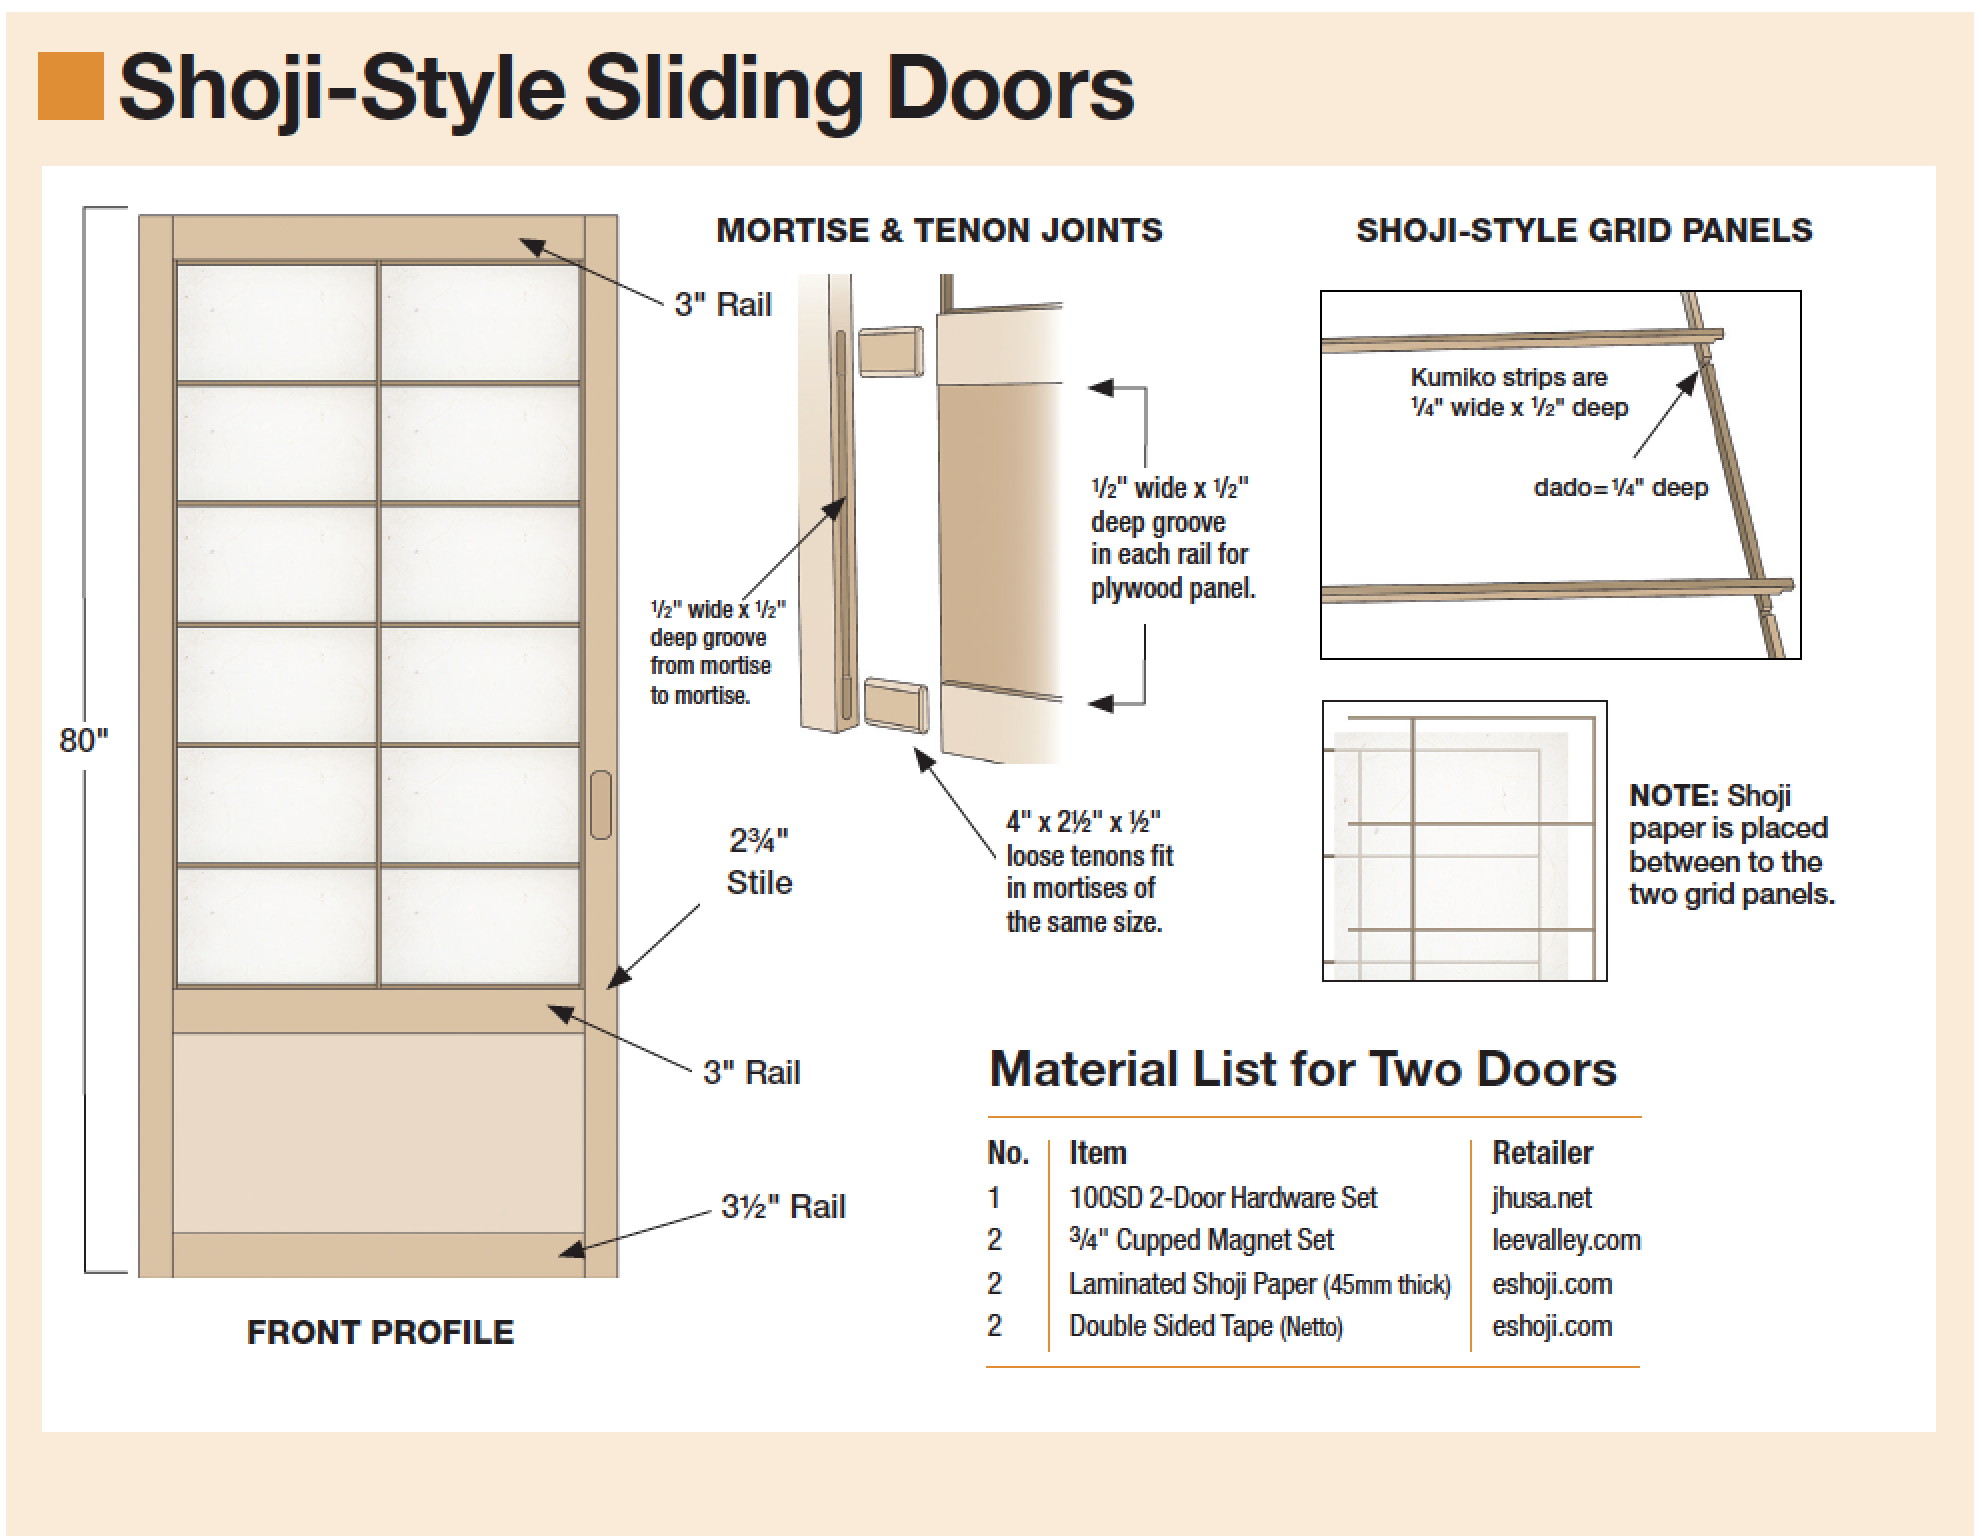 How to Replace the Paper on 'Shoji' Doors